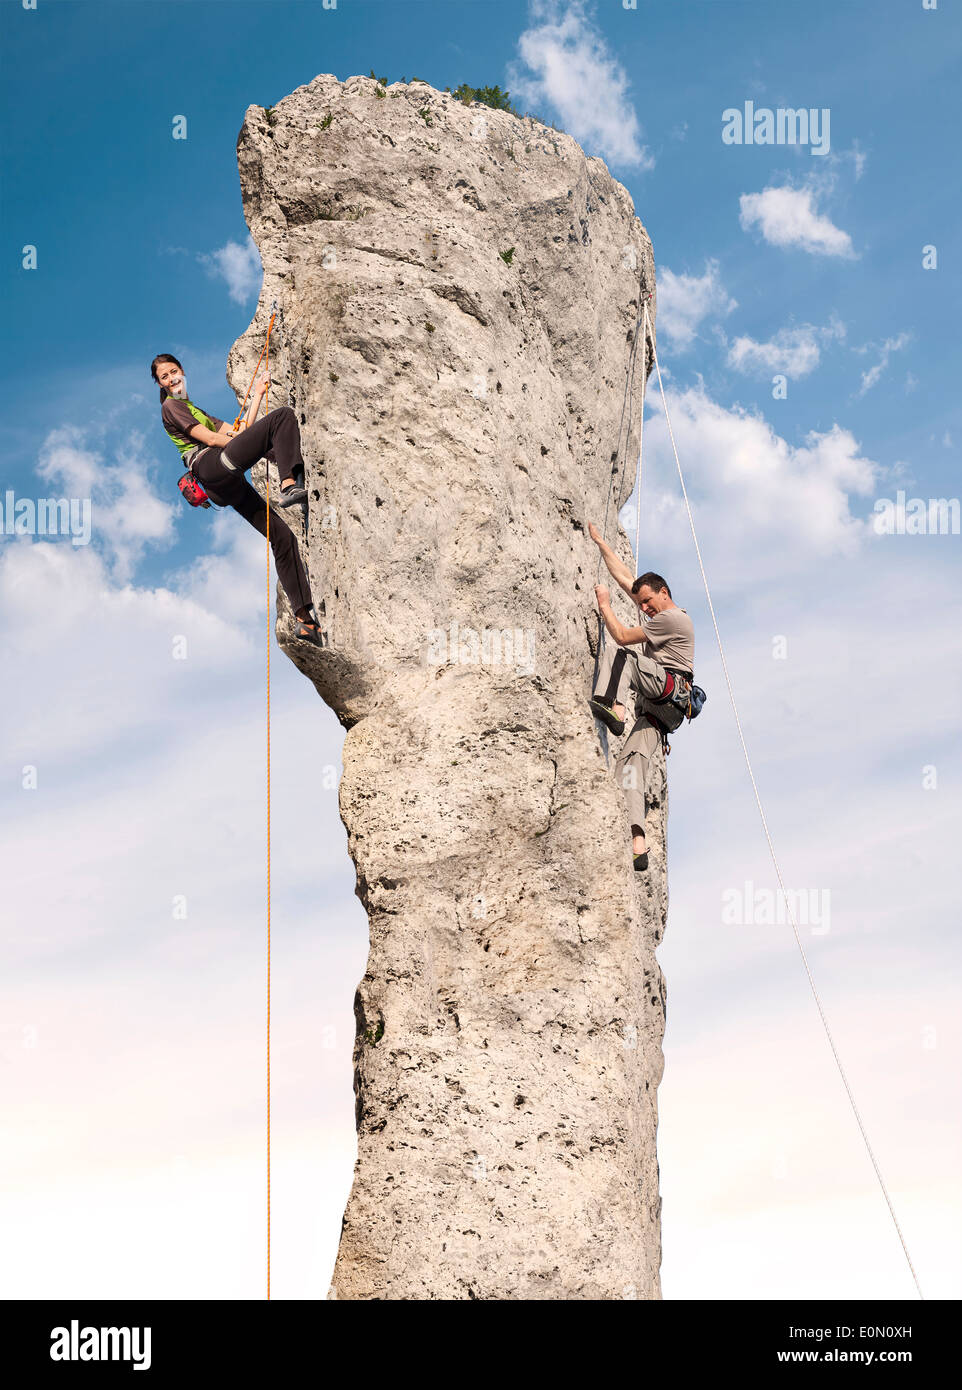 Climbers in action, young woman and man climbing difficult rock. Stock Photo